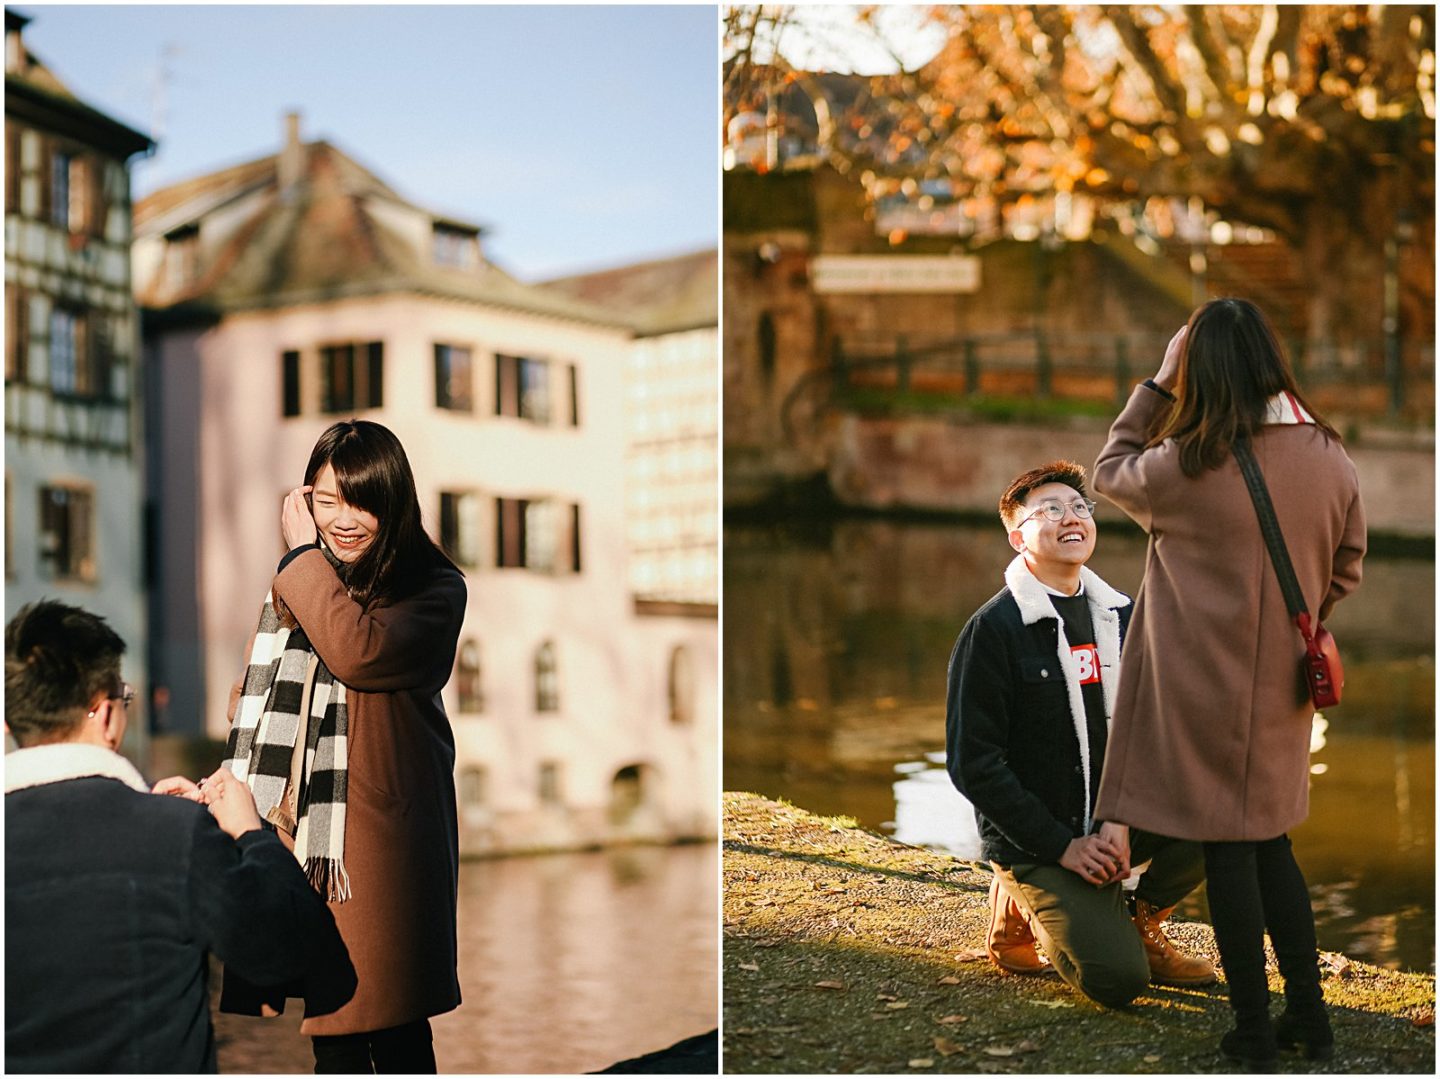 Alsace photographer takes pictures of surprise proposal in Strasbourg's Petite France